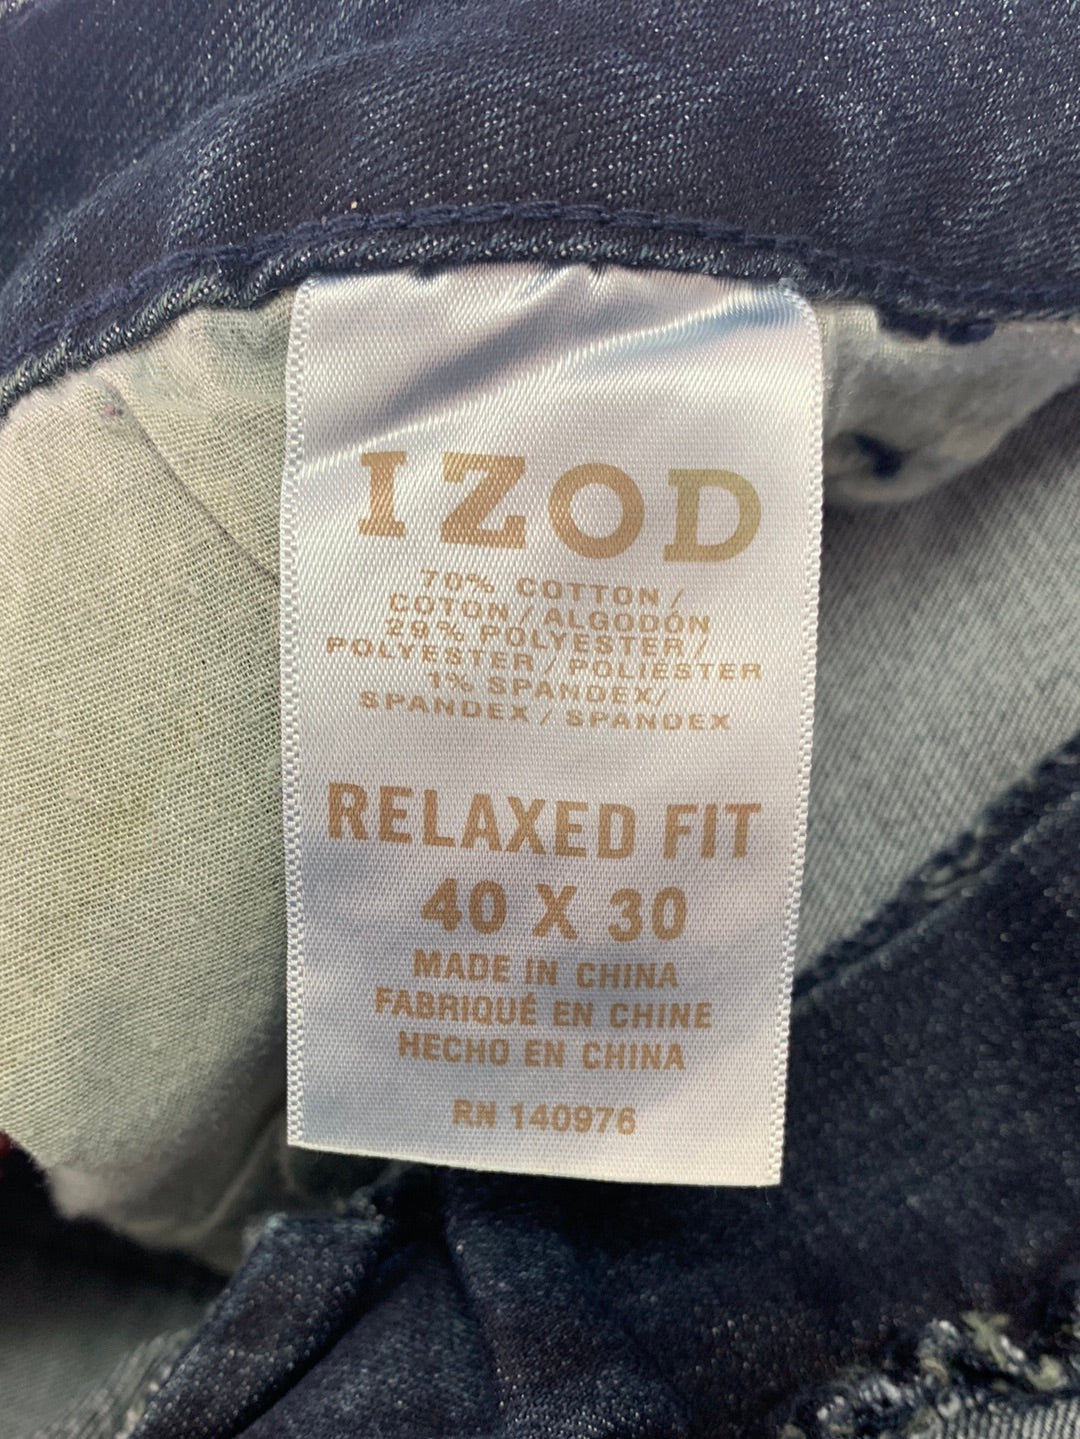 NWT - IZOD dark wash Comfort Stretch Relaxed Fit Straight Leg Jeans - 40 x 30